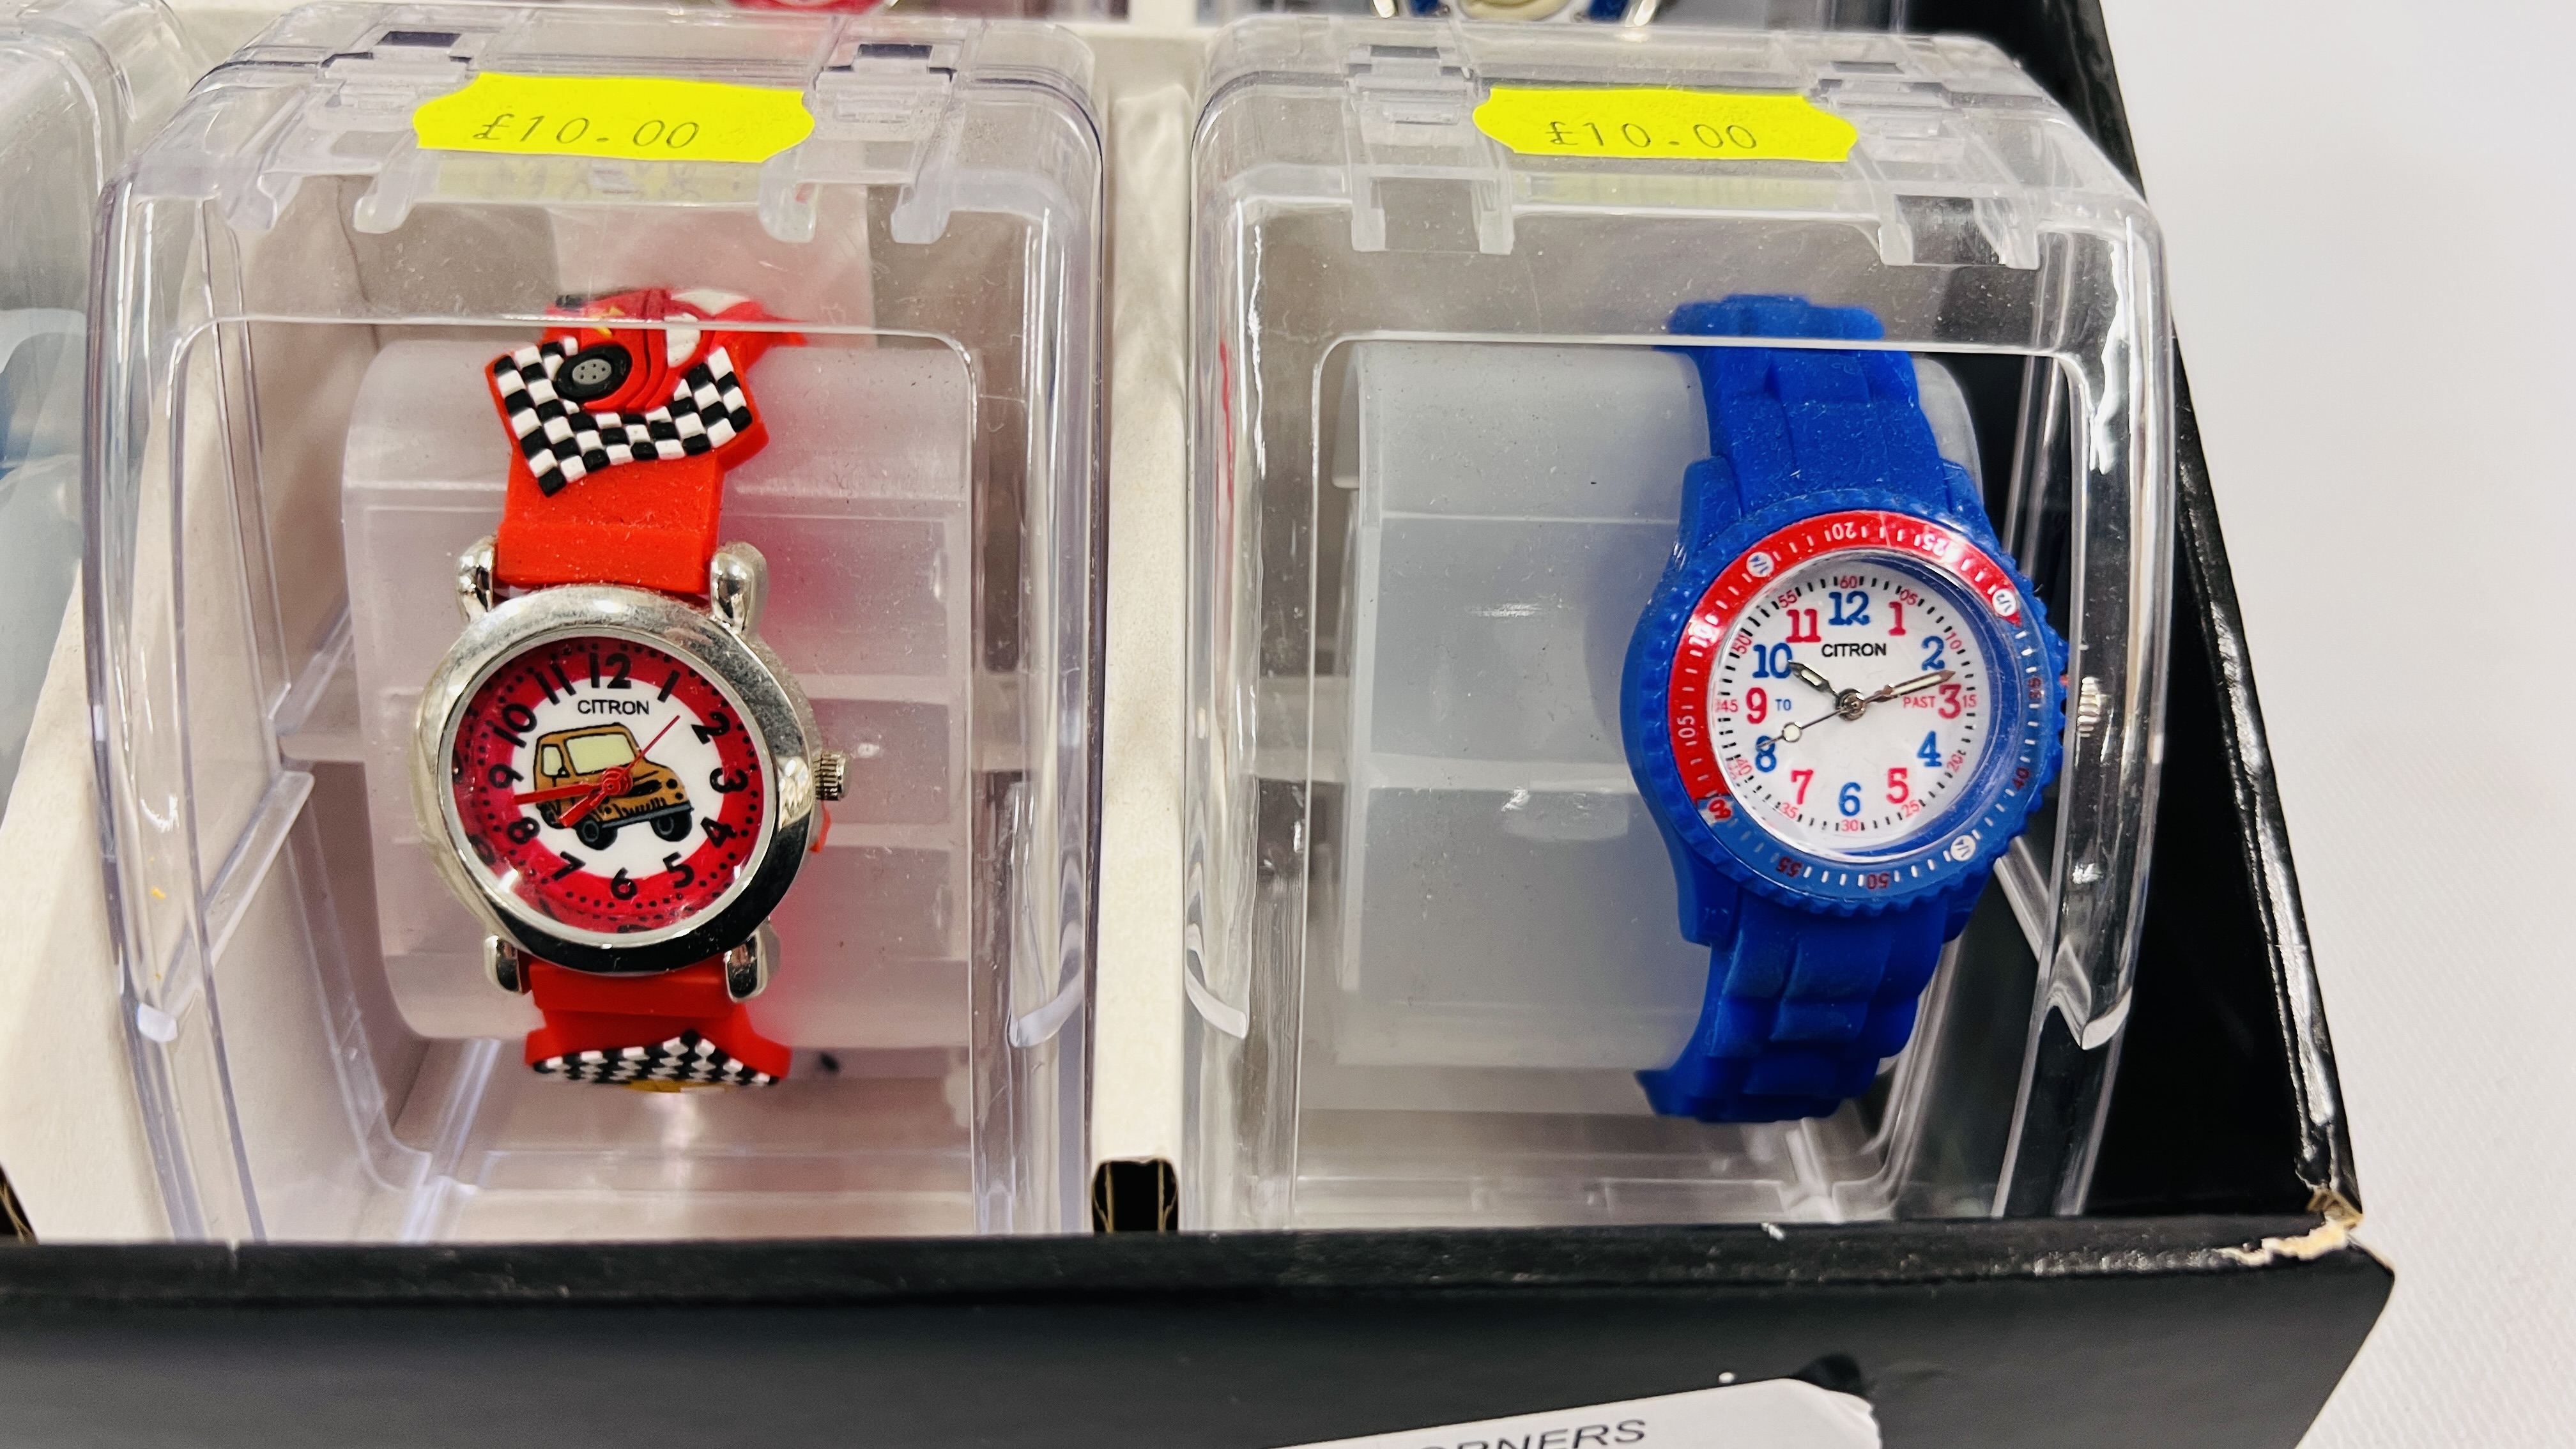 BANKRUPTCY STOCK - 12 X BOXED CITRON CHILDREN'S WRIST WATCHES VARIOUS DESIGNS. - Image 3 of 7